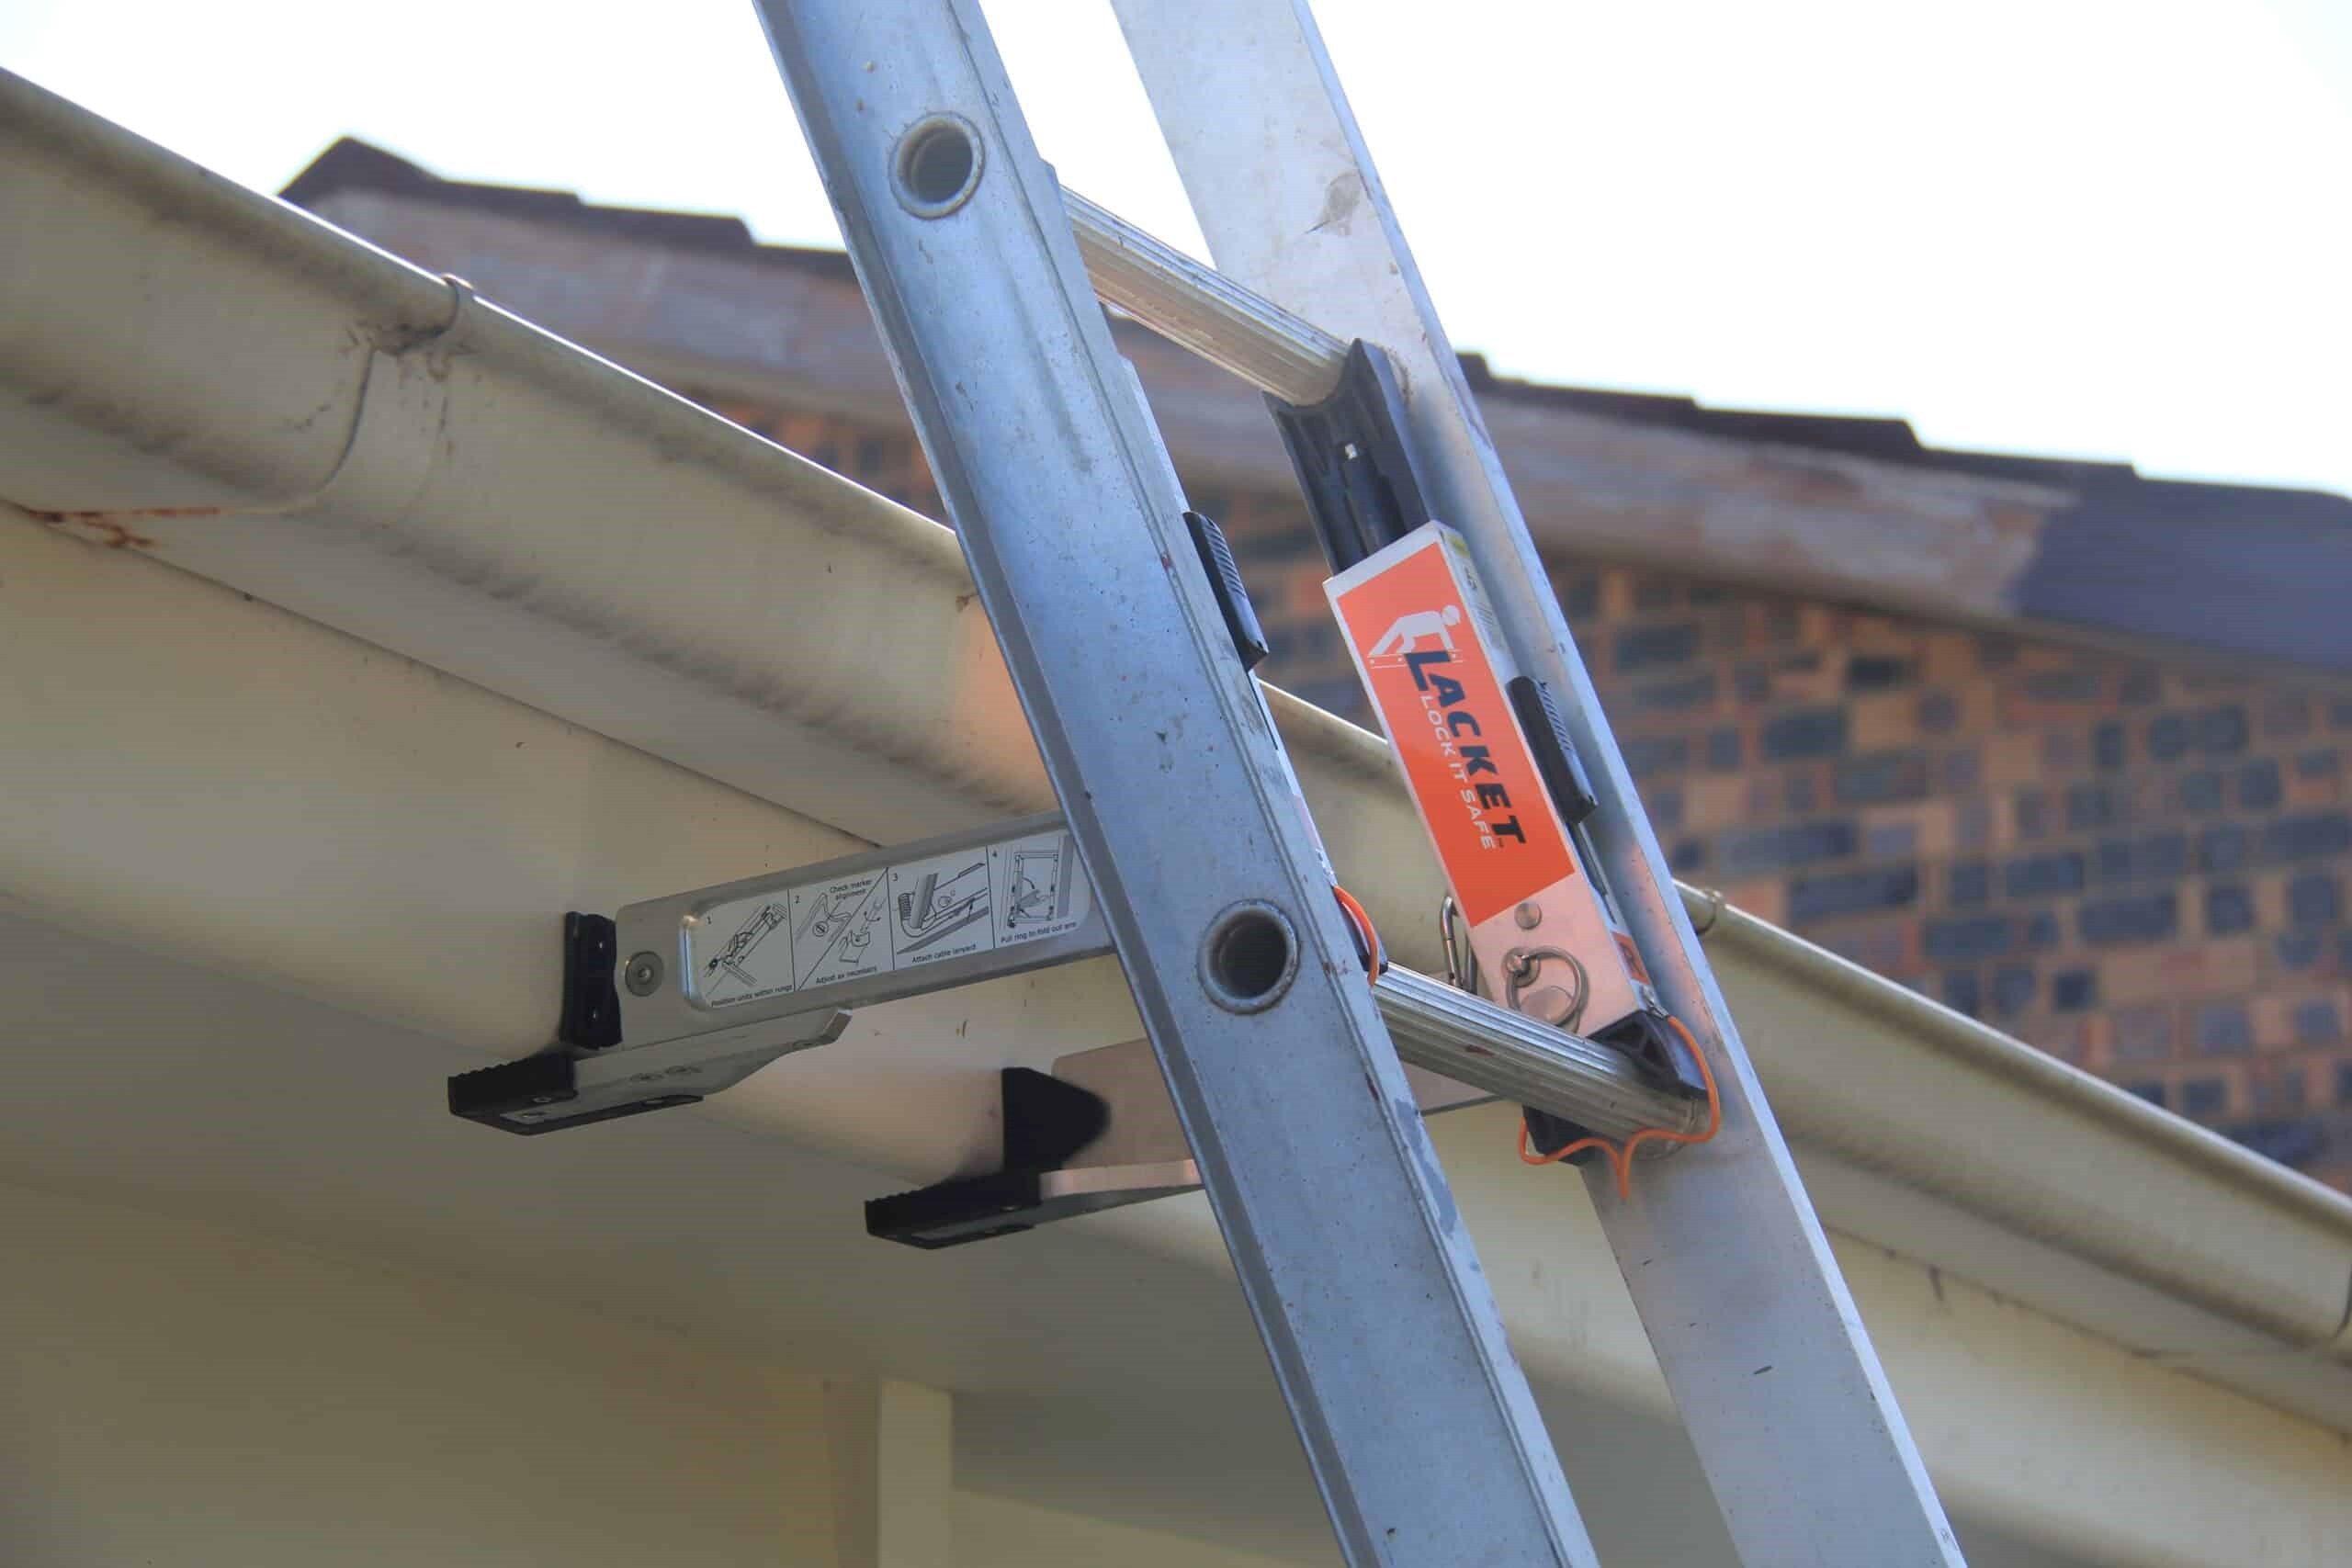 How To Secure A Ladder To A Roof